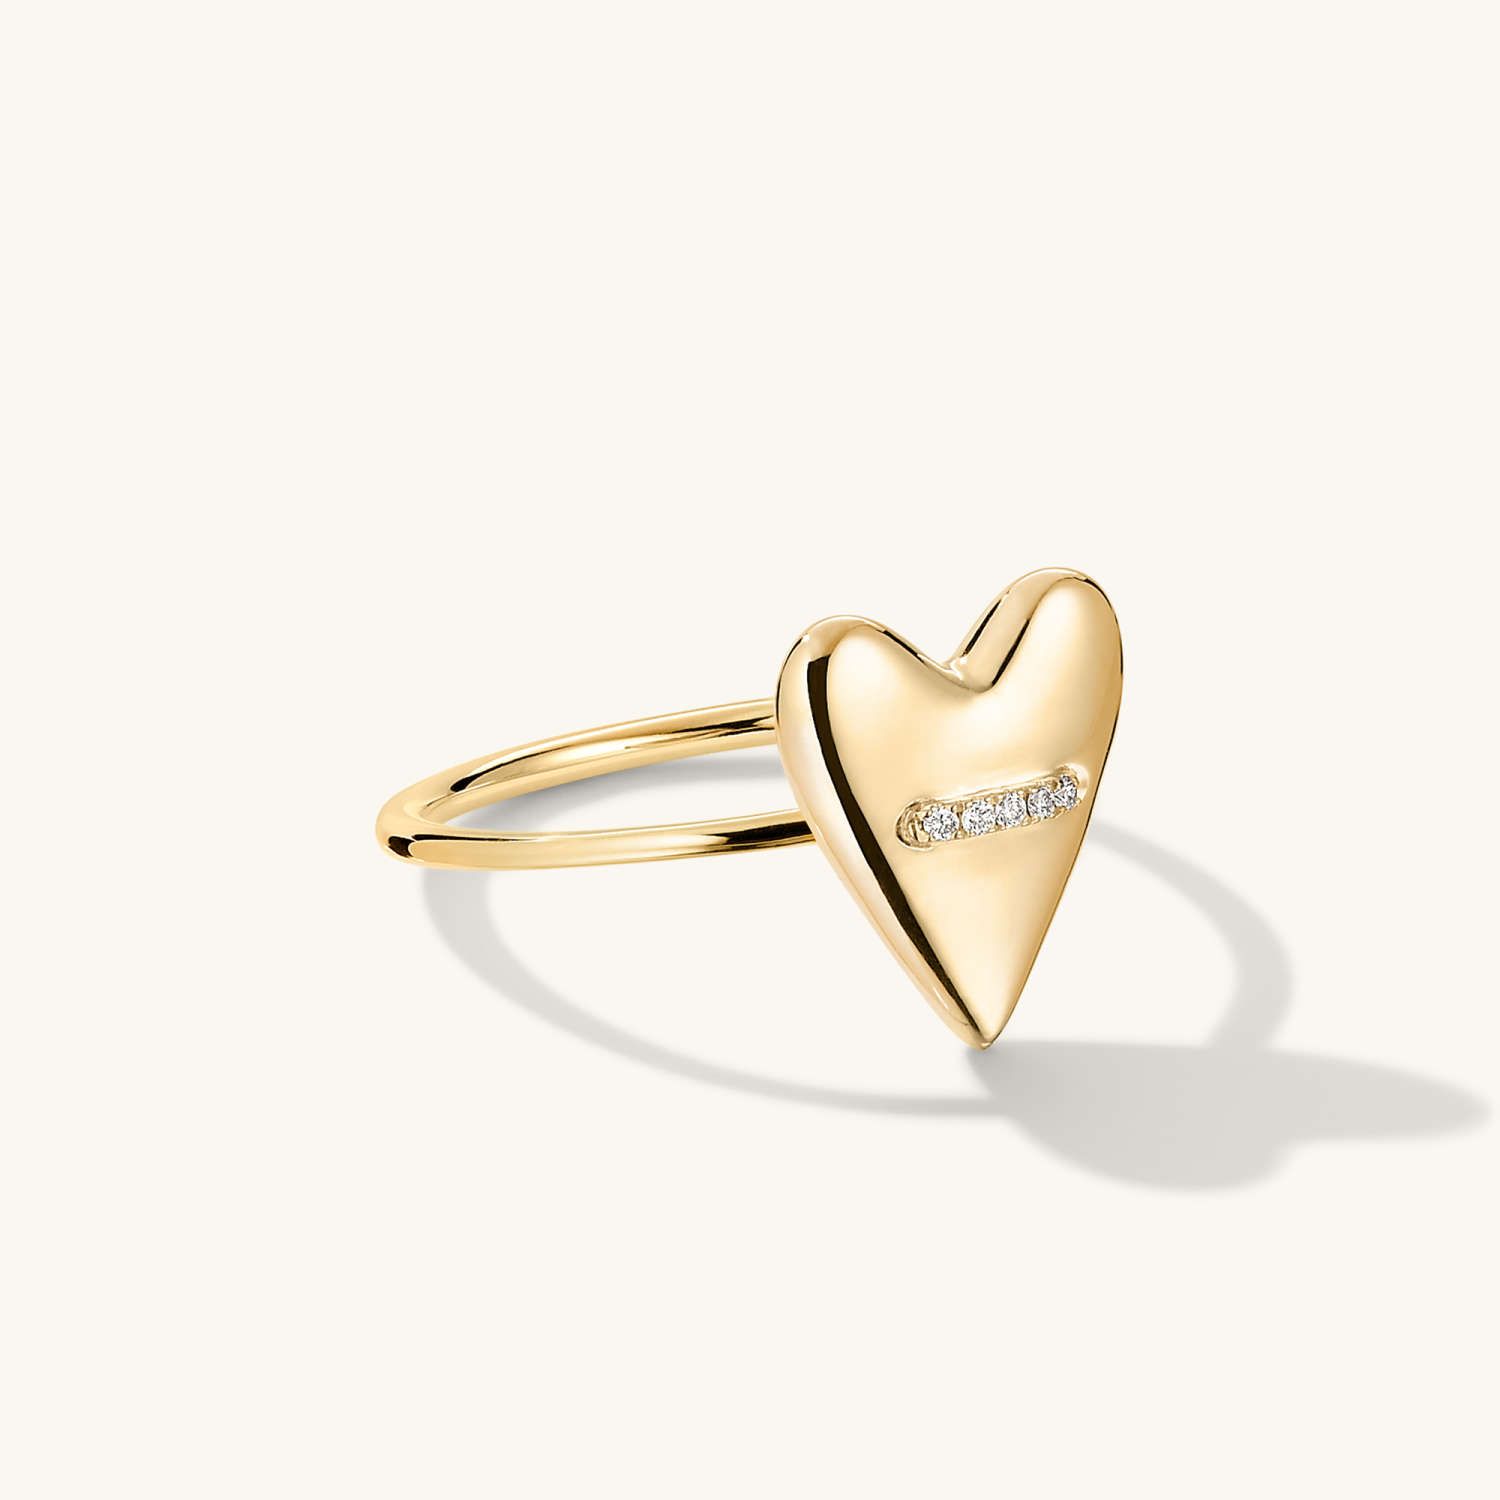 Heart Pavé Diamond Ring : Handcrafted in 14k Gold | Mejuri | Mejuri (Global)